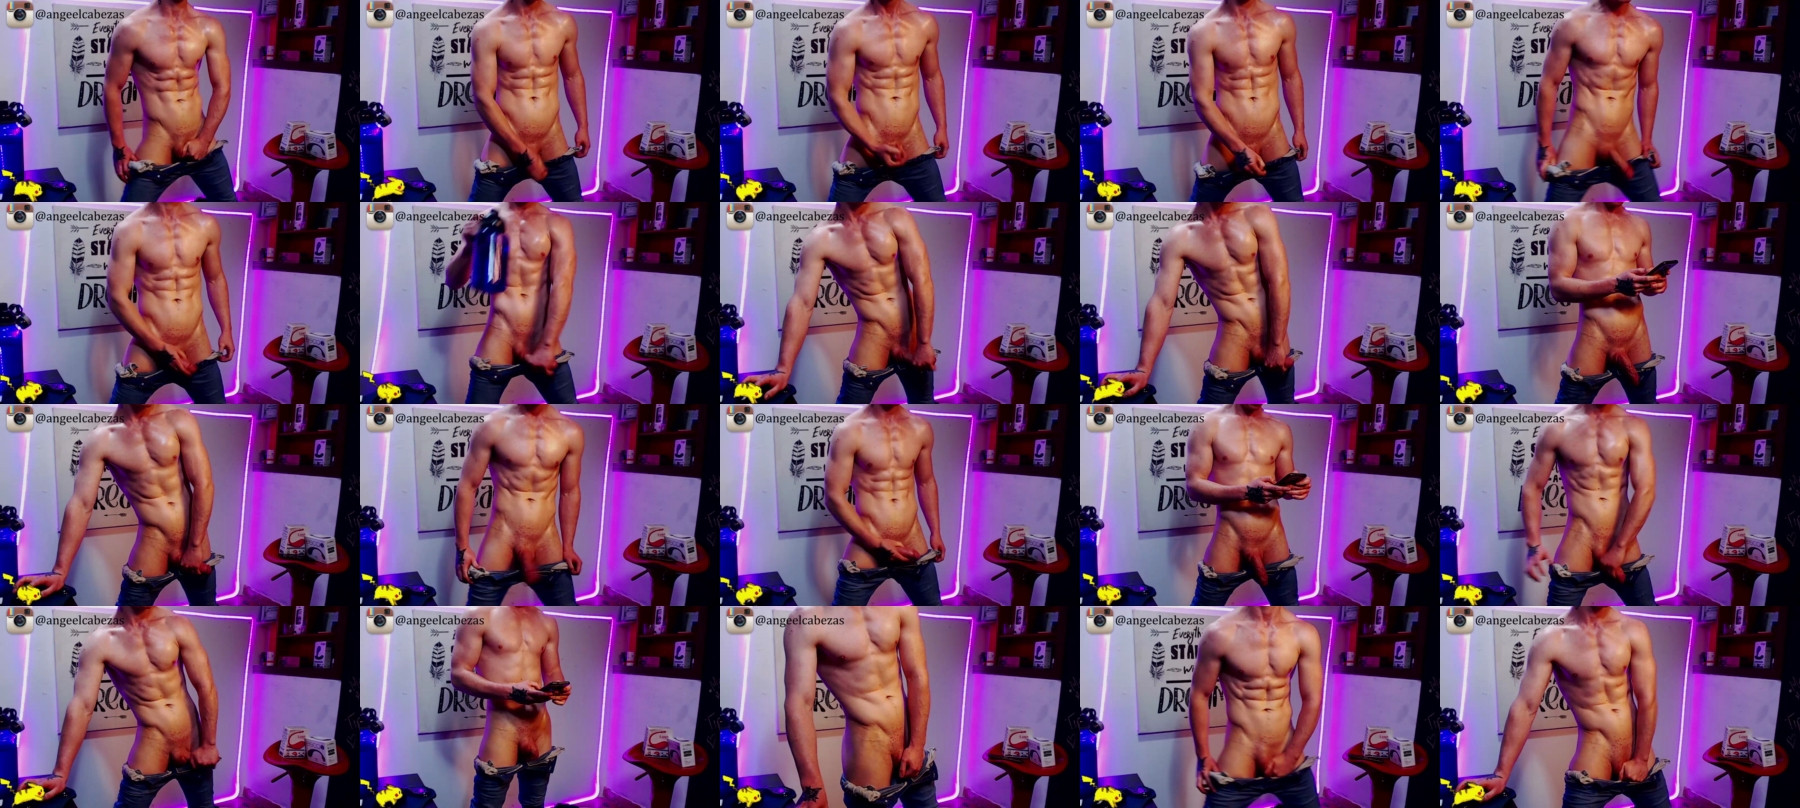 White_Angel20  20-05-2021 Male Topless